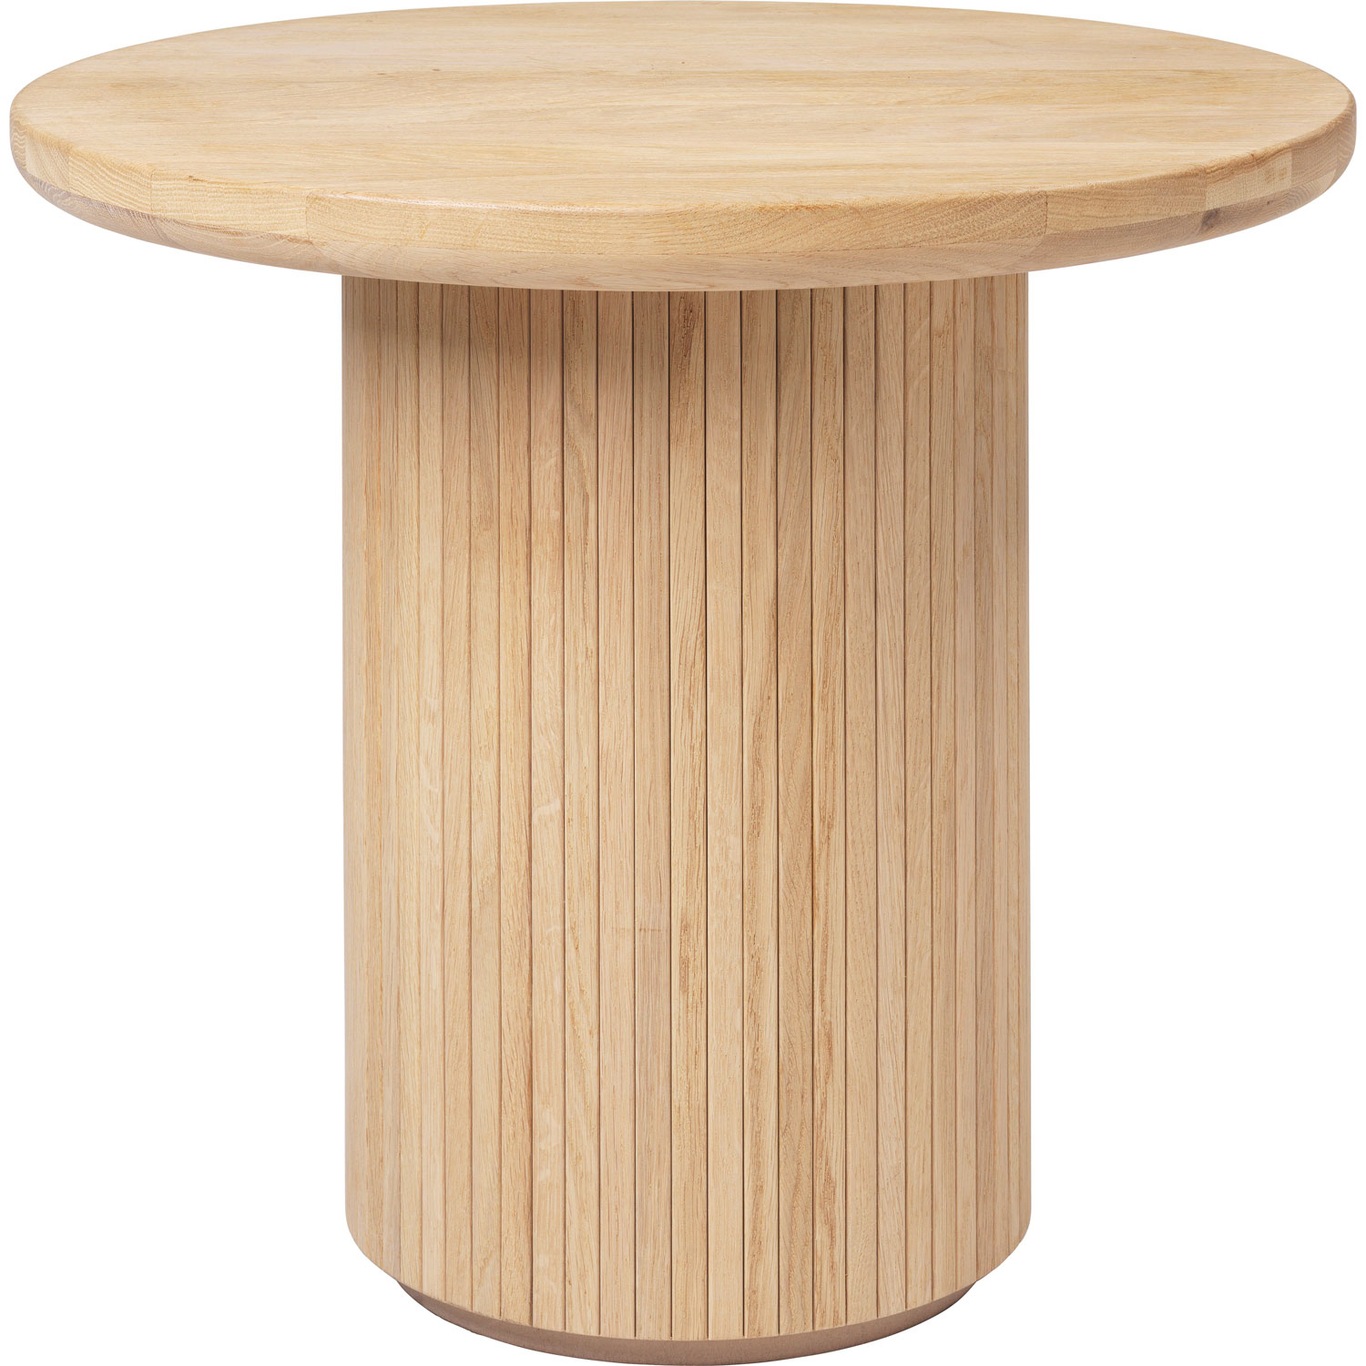 Moon Lounge Table Round Ø60 x H55 cm, Solid Soaped Oak